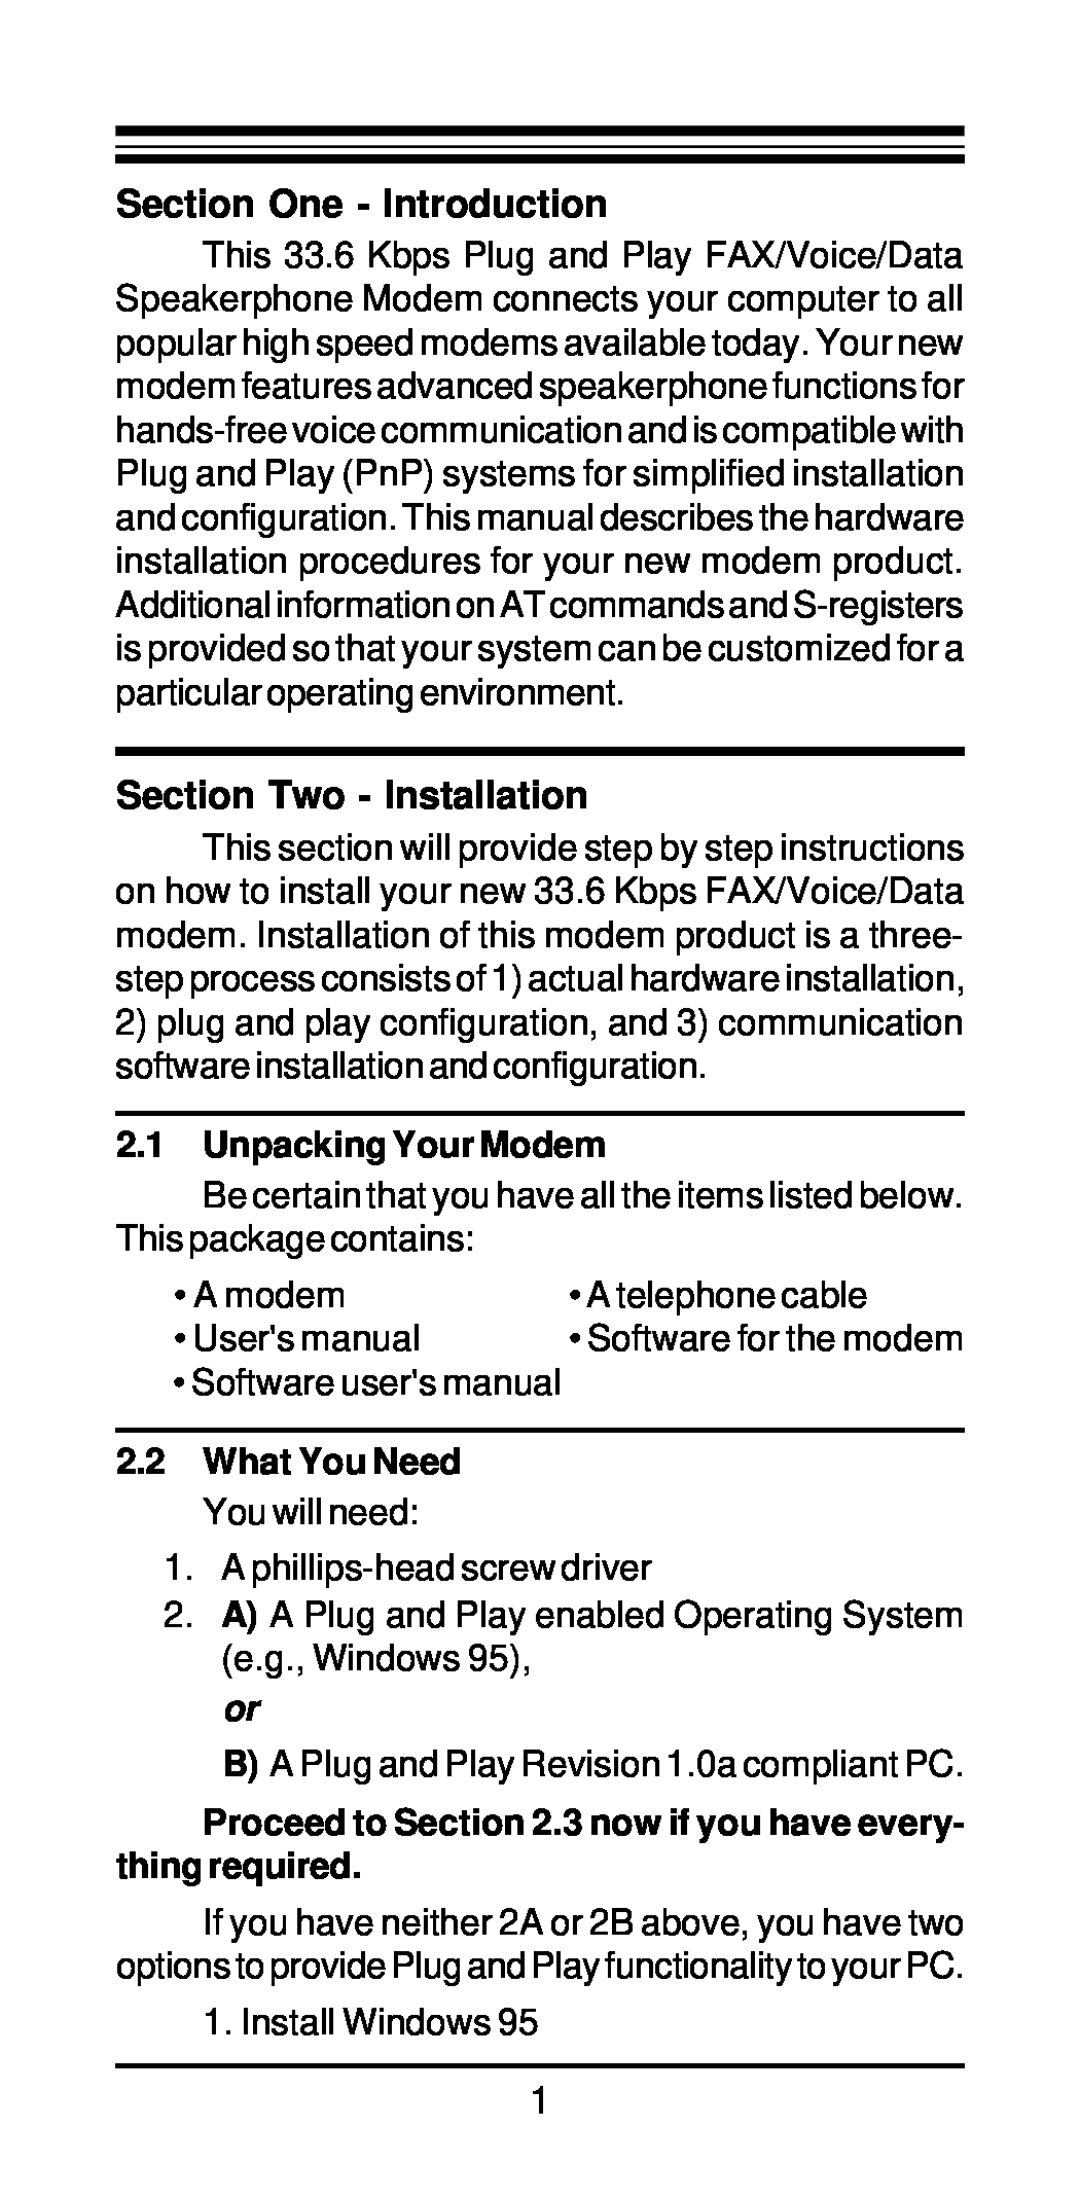 MaxTech xpvs336i Section One - Introduction, Section Two - Installation, Unpacking Your Modem, What You Need You will need 